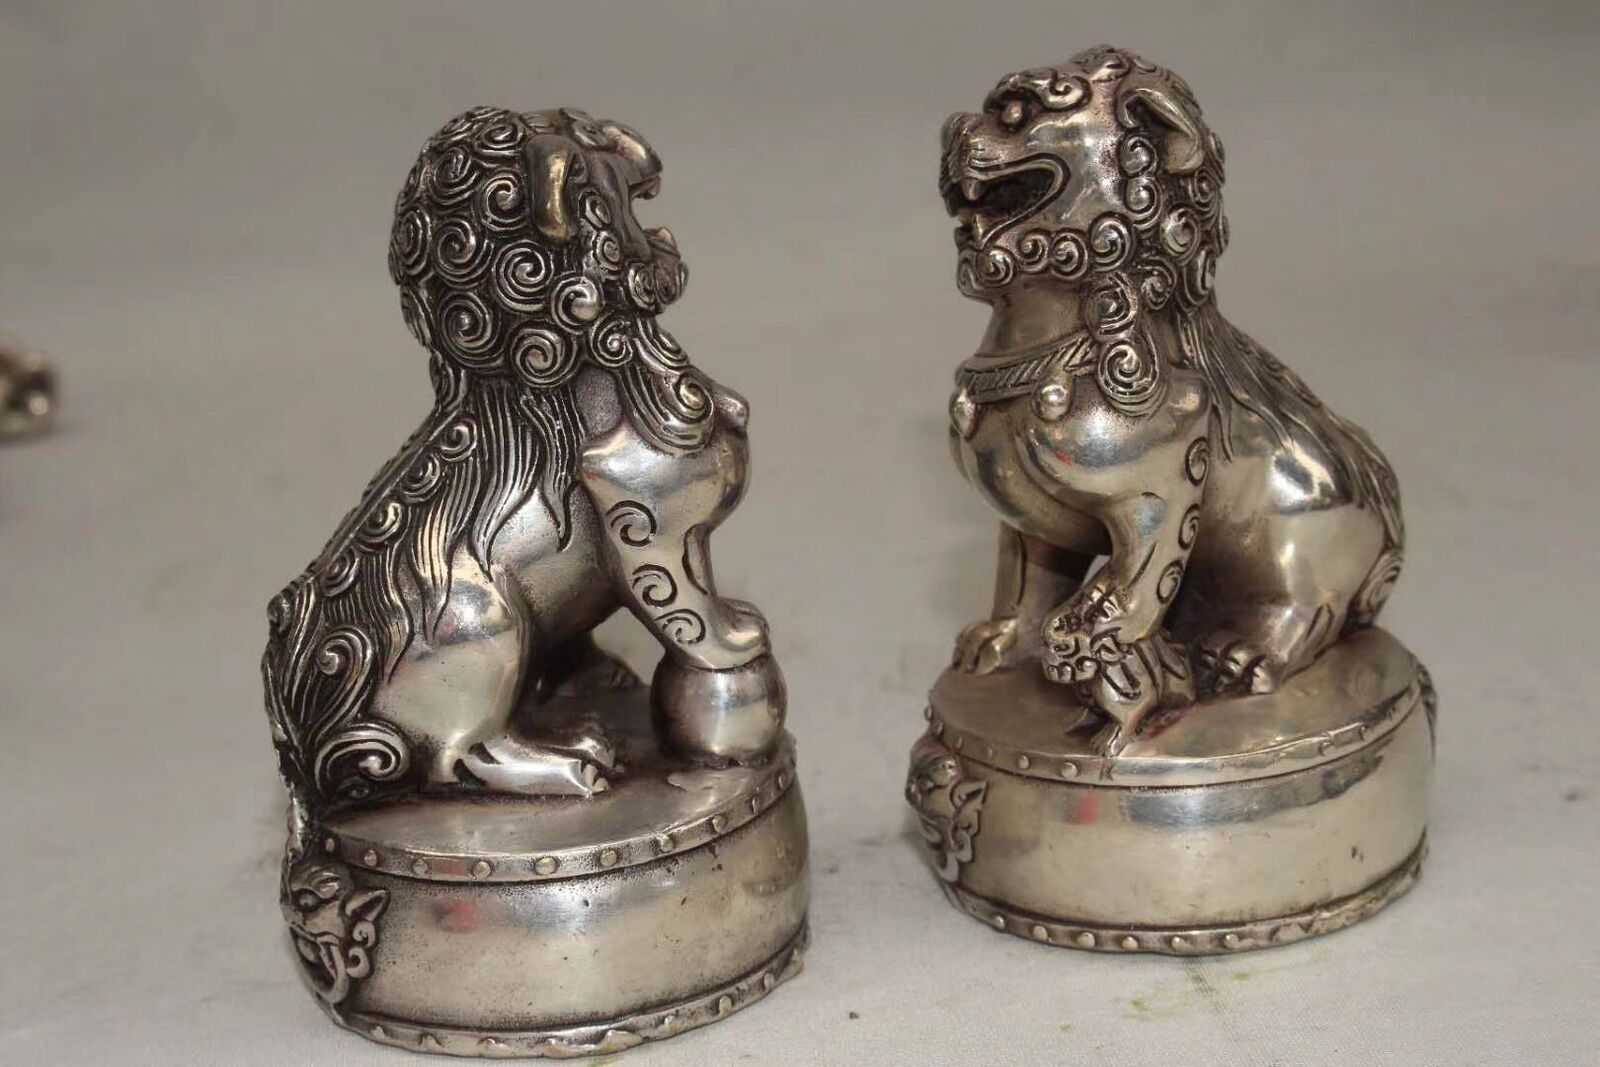  Exquisite Chinese Old silver copper hand-made lucky lion Home decoration